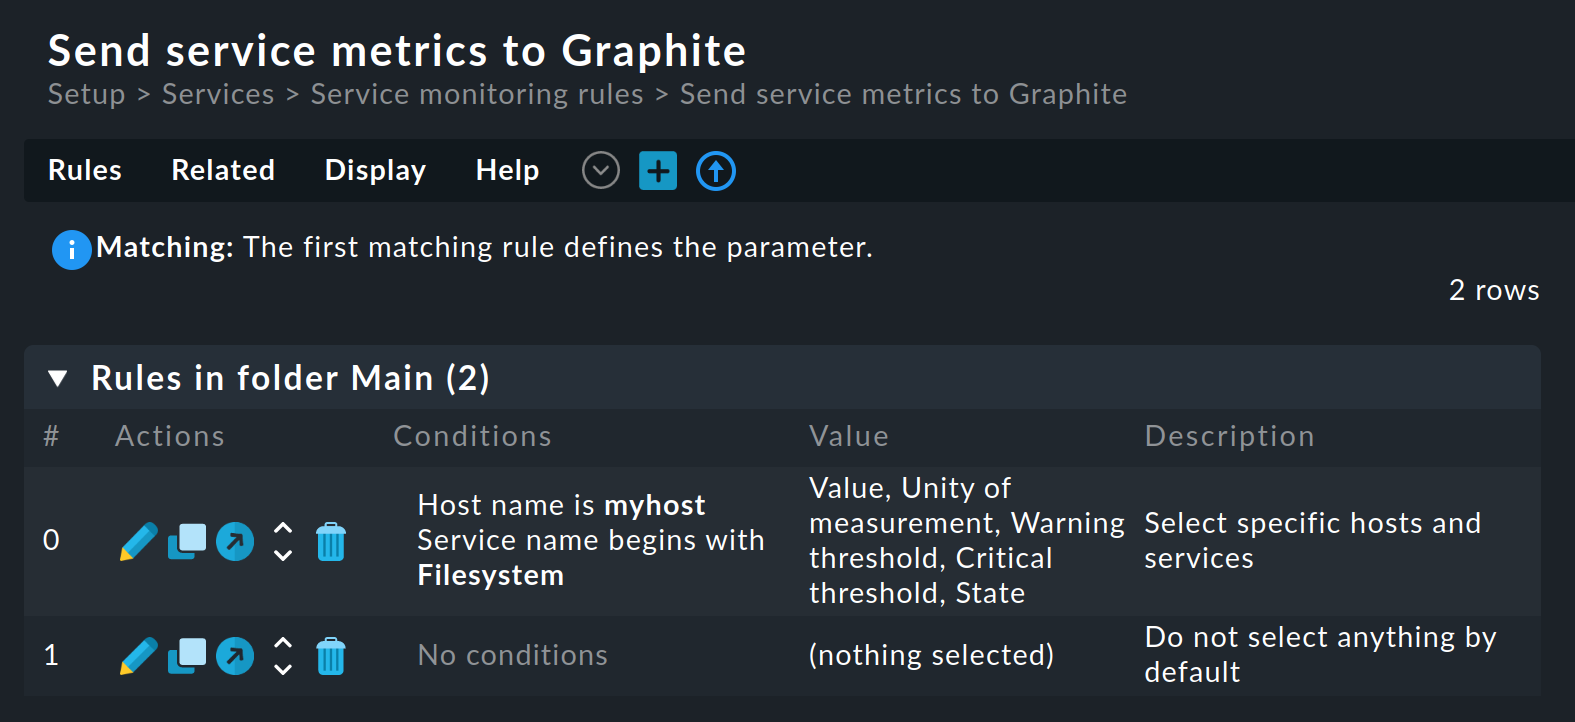 List of rules for sending via the Graphite connection.